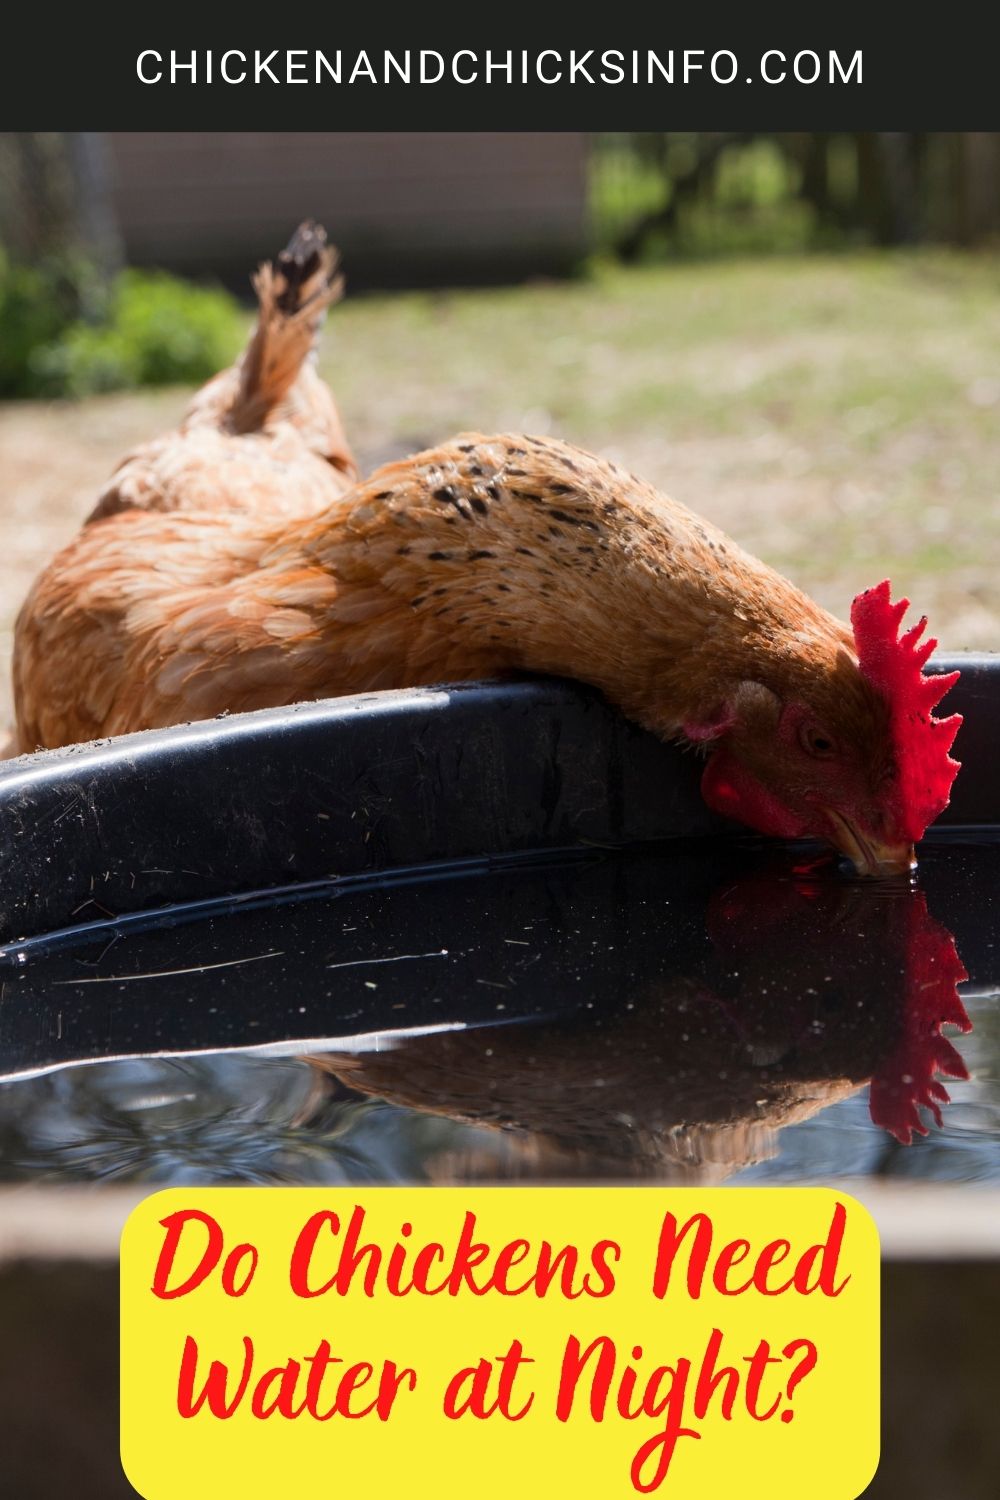 Do Chickens Need Water at Night? poster.
